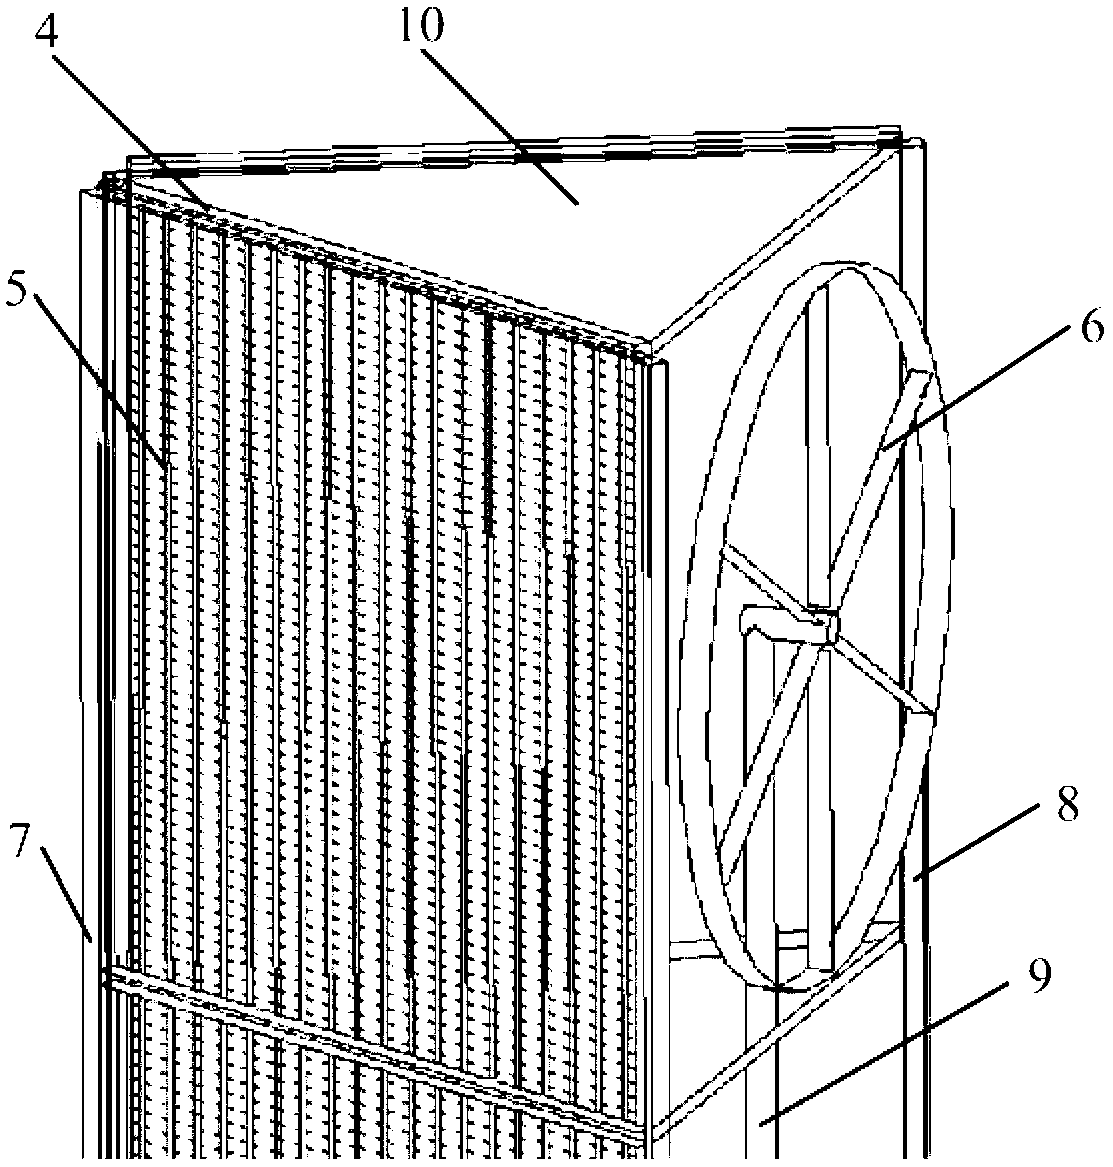 Air-cooling condenser structure containing horizontal shaft axial flow fan group